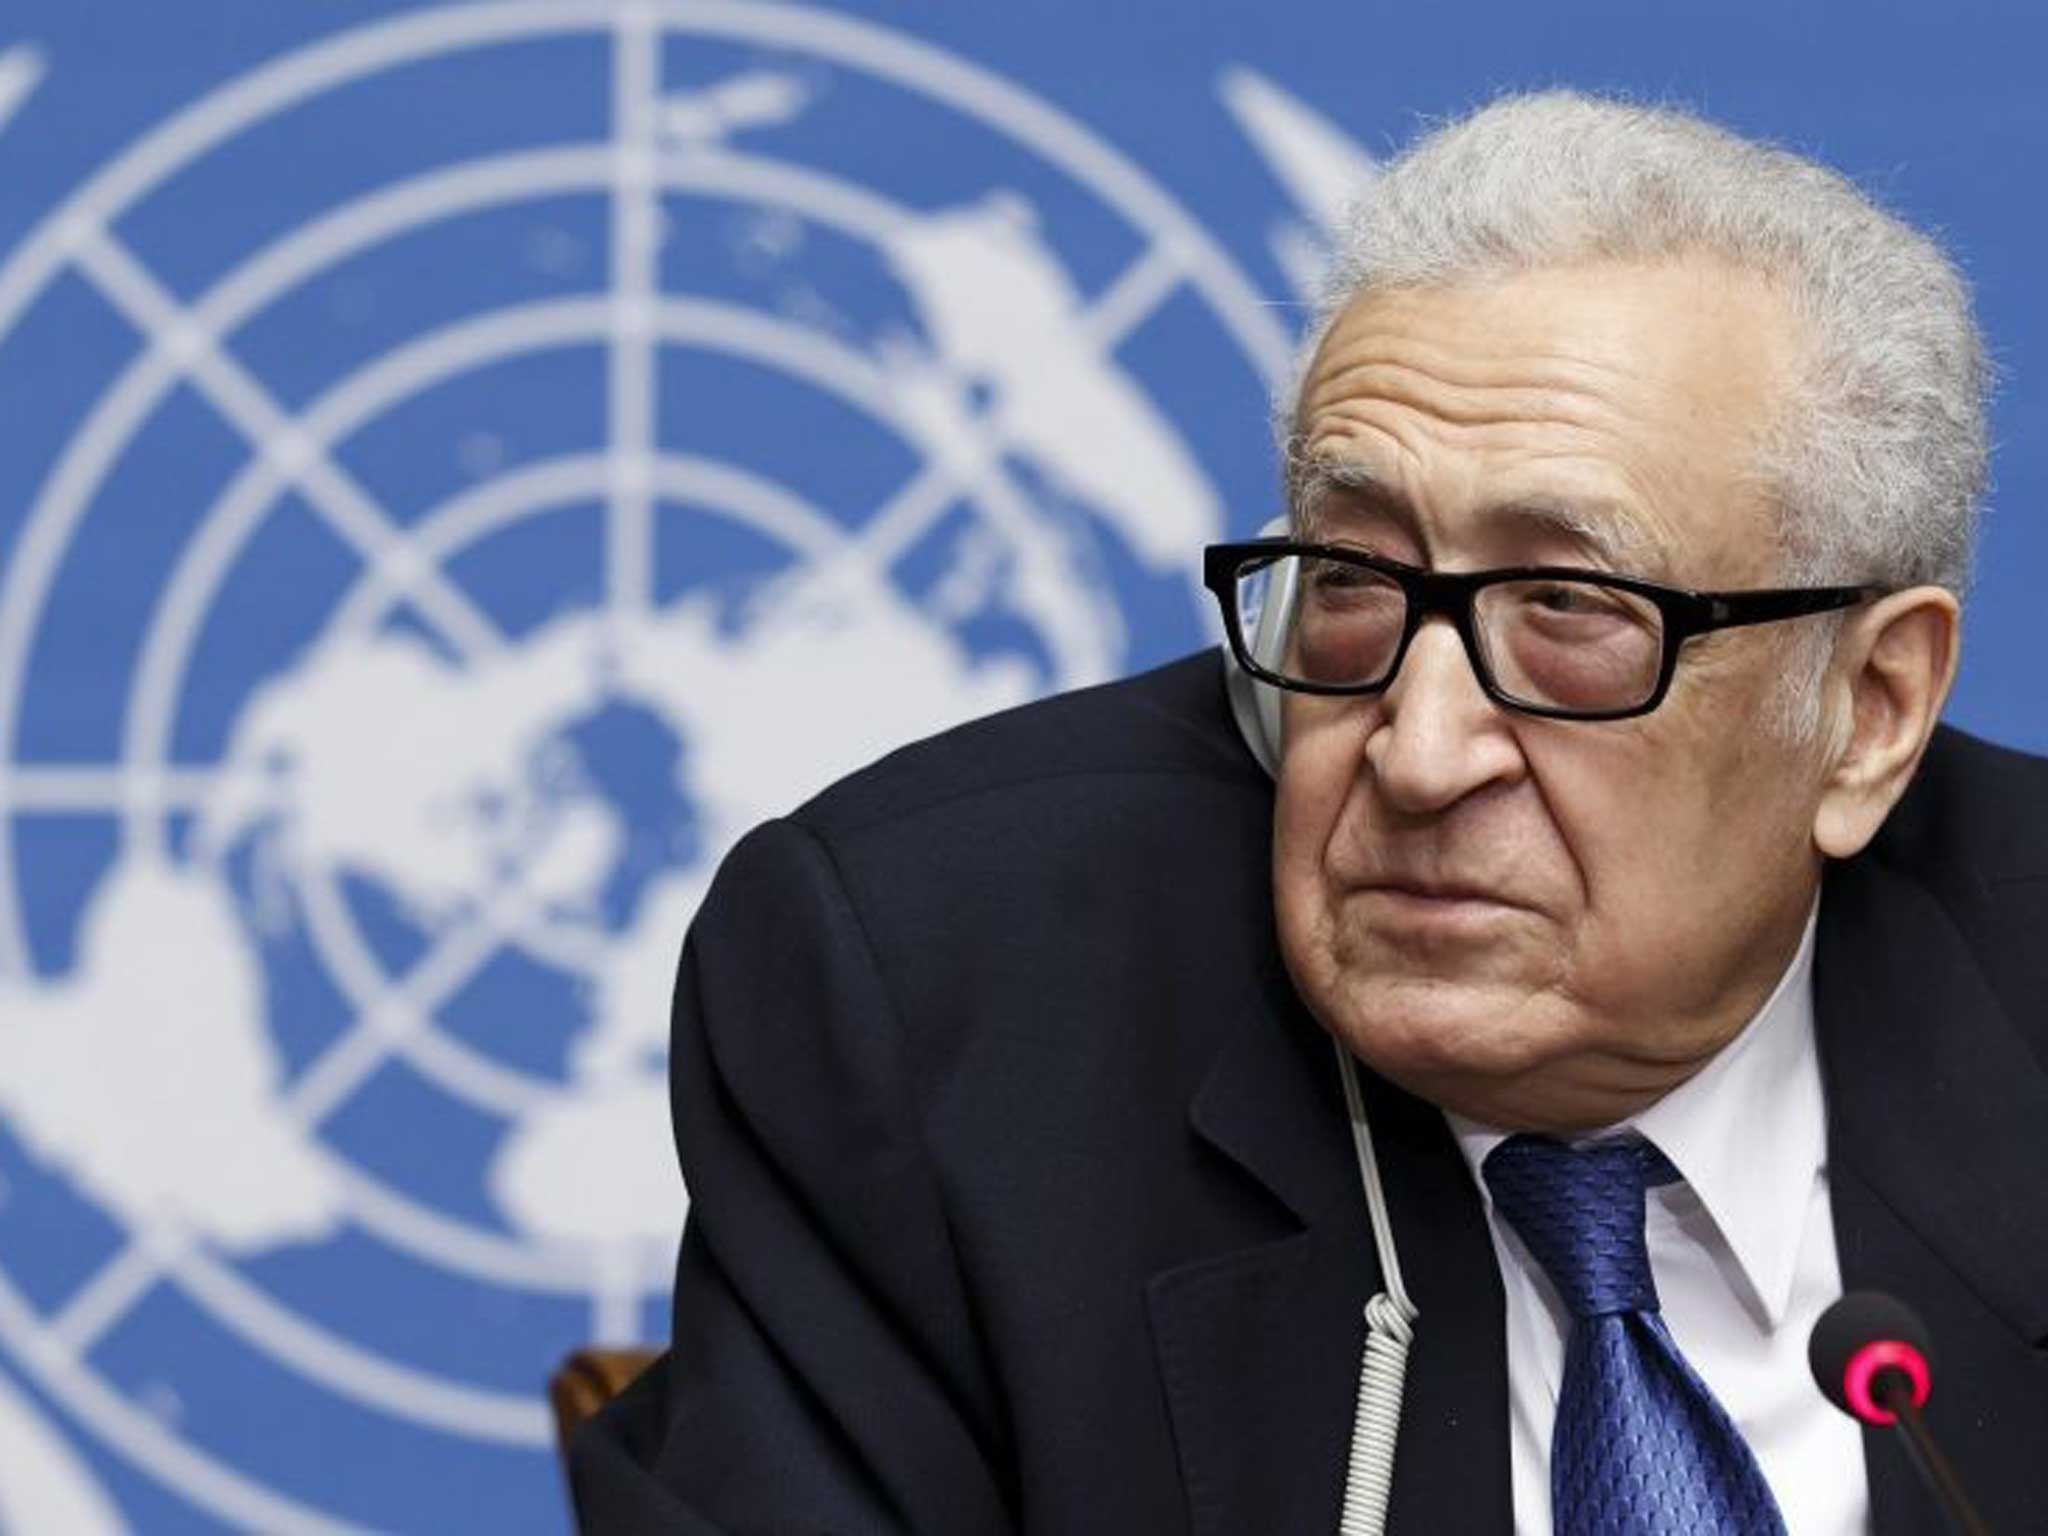 N-Arab League Special Envoy to Syria Lakhdar Brahimi during a press conference